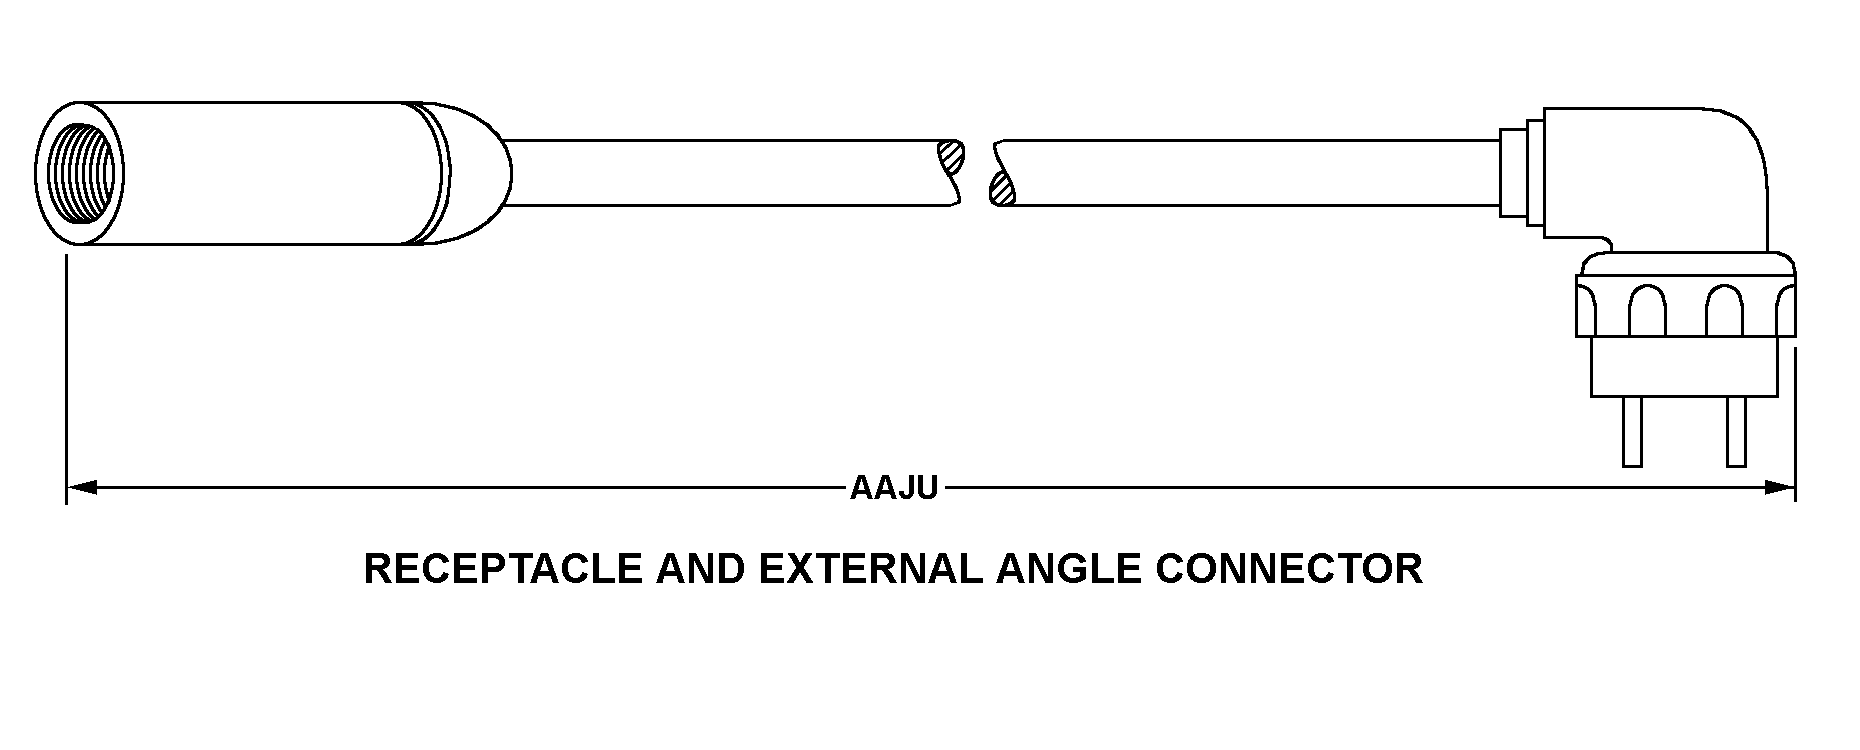 RECEPTACLE AND EXTERNAL ANGLE CONNECTOR style nsn 5995-01-042-5245